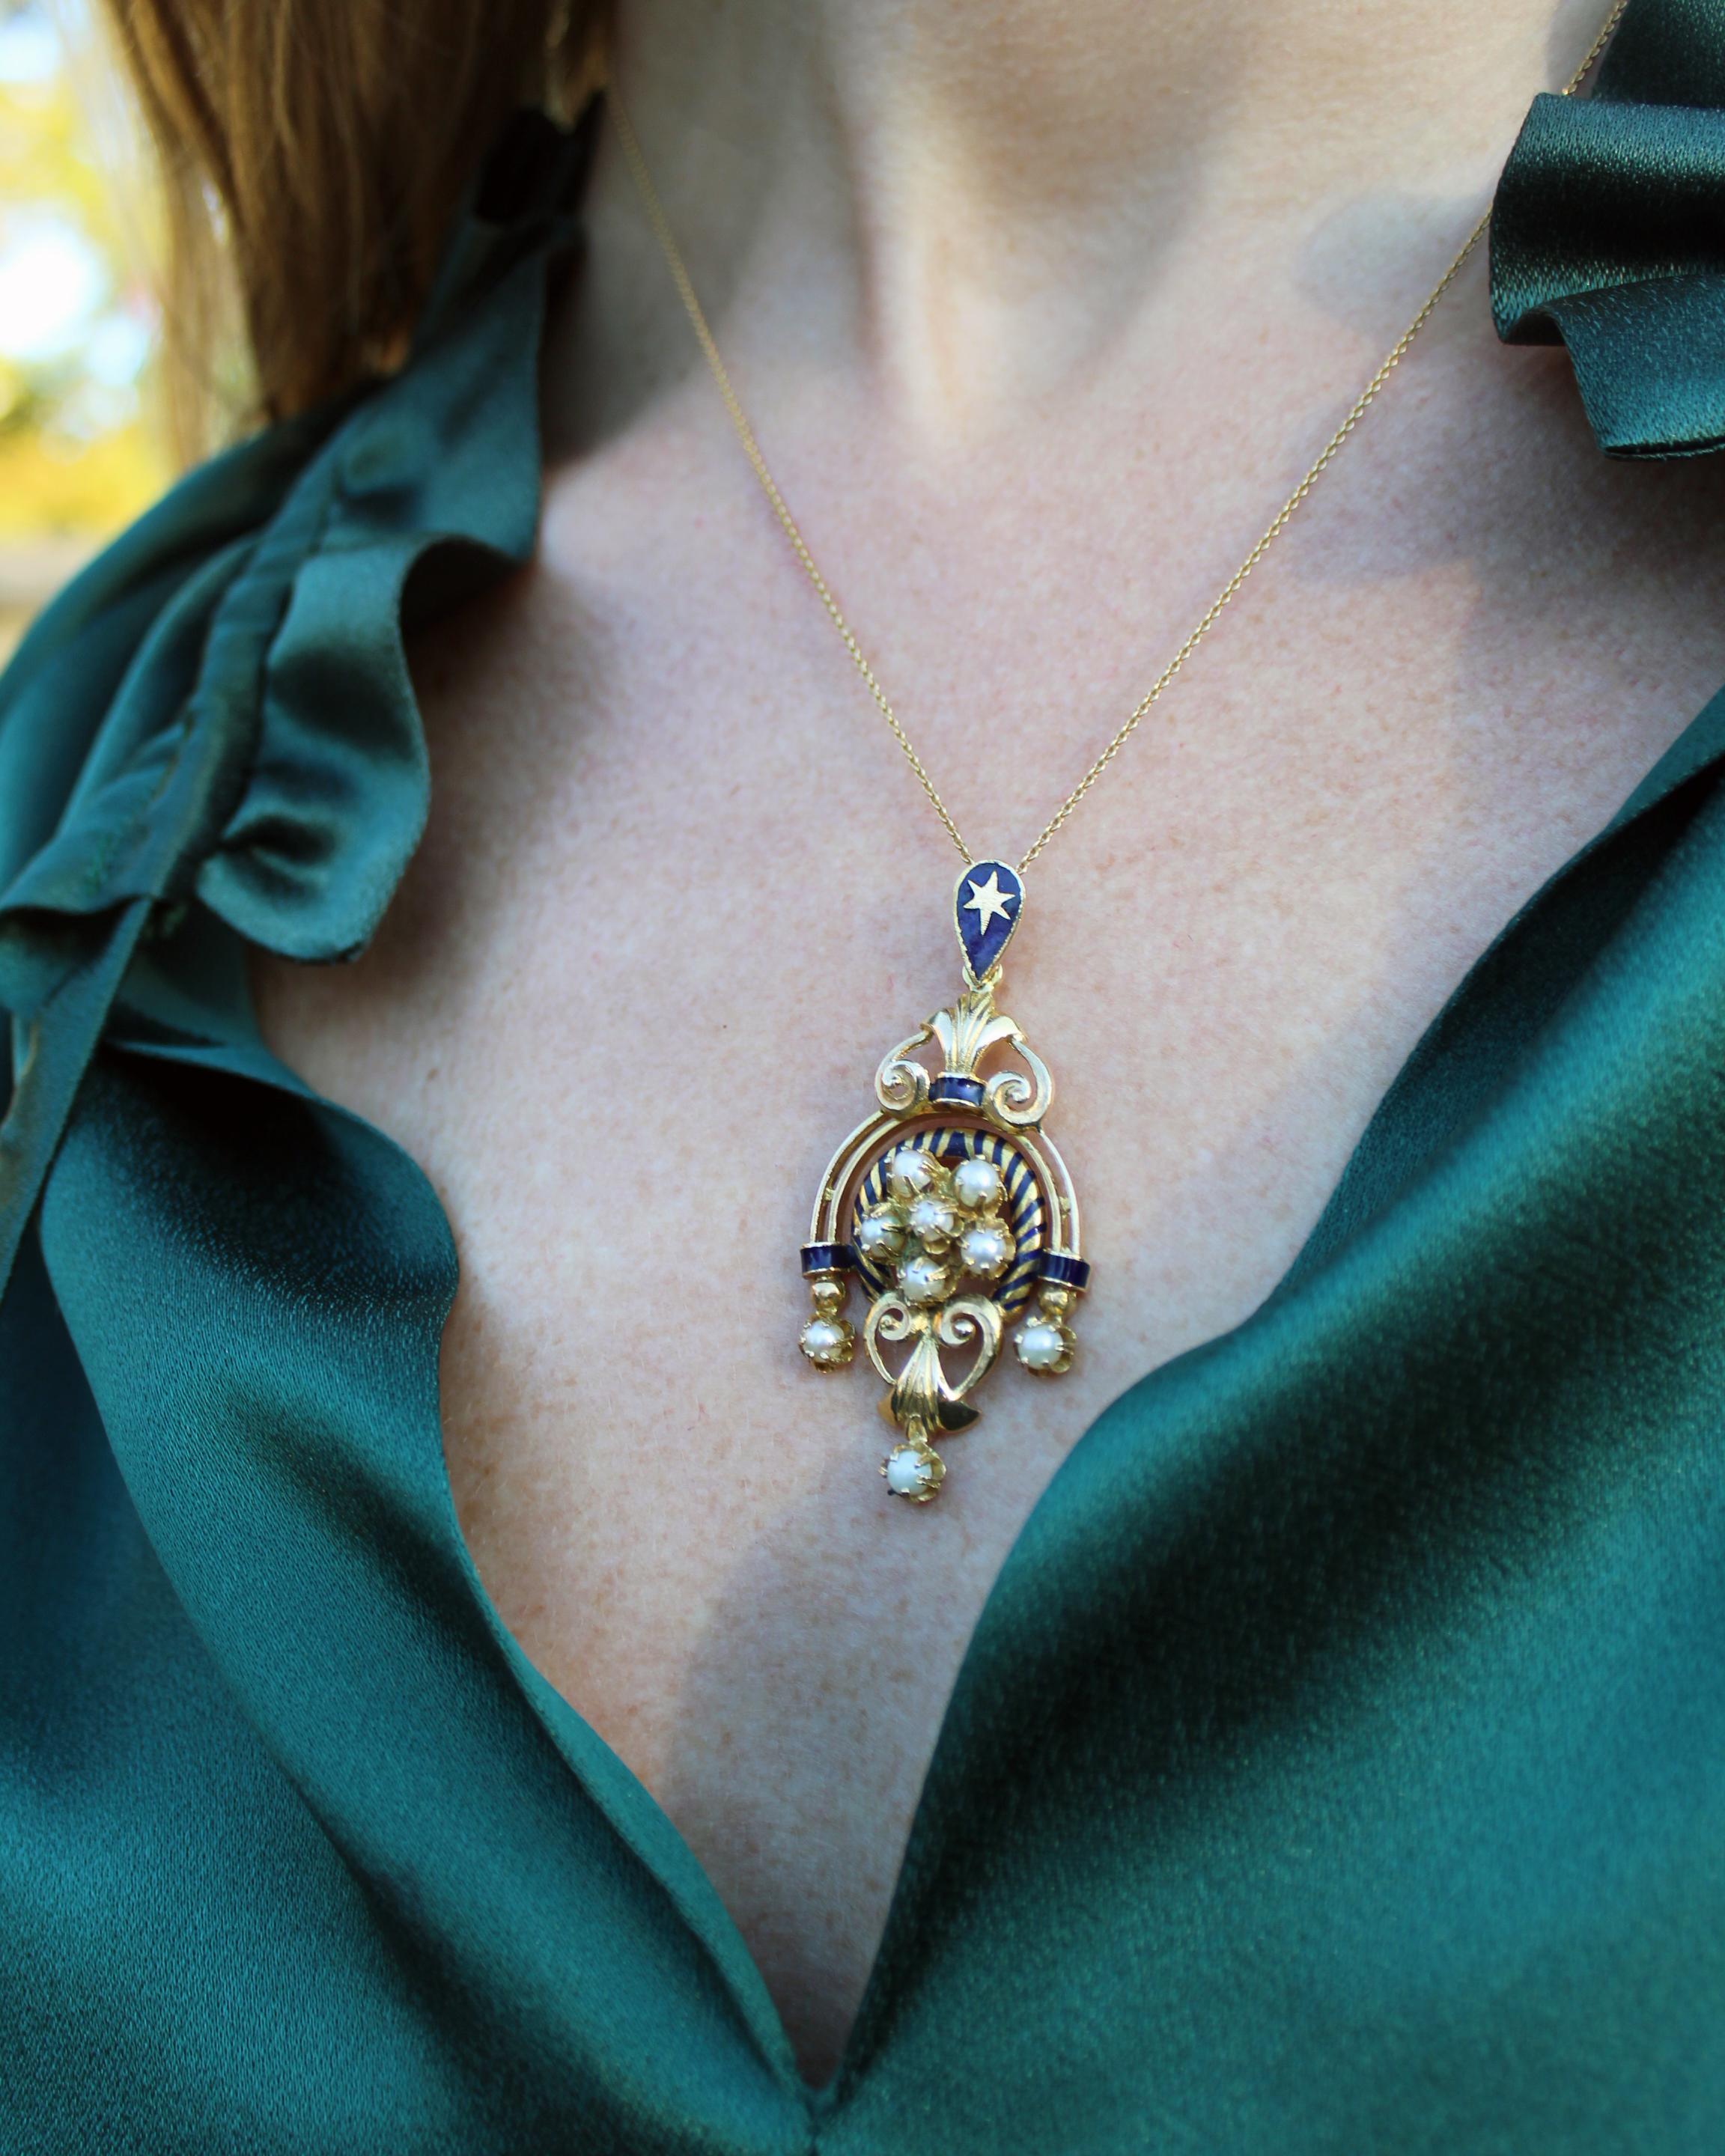 This vintage lavalier pendant is an incredibly special piece that will be in your collection and certainly become an heirloom. It features an ornate architectural volute motif, crafted from solid 14k gold with blue enamel work and seed pearls. I